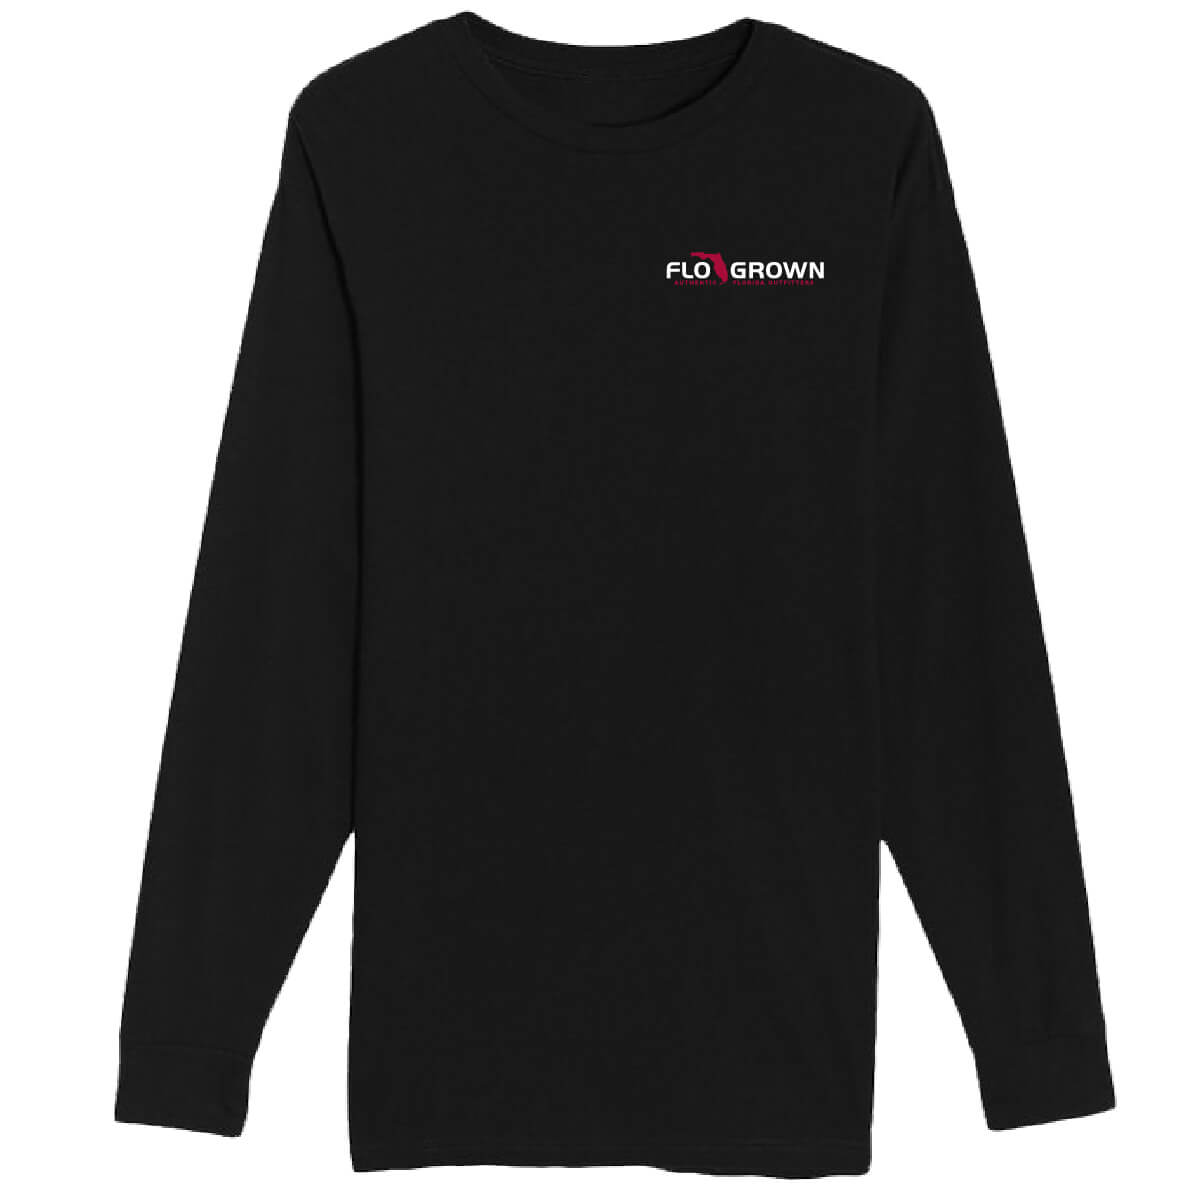 Stand Strong Long Sleeve